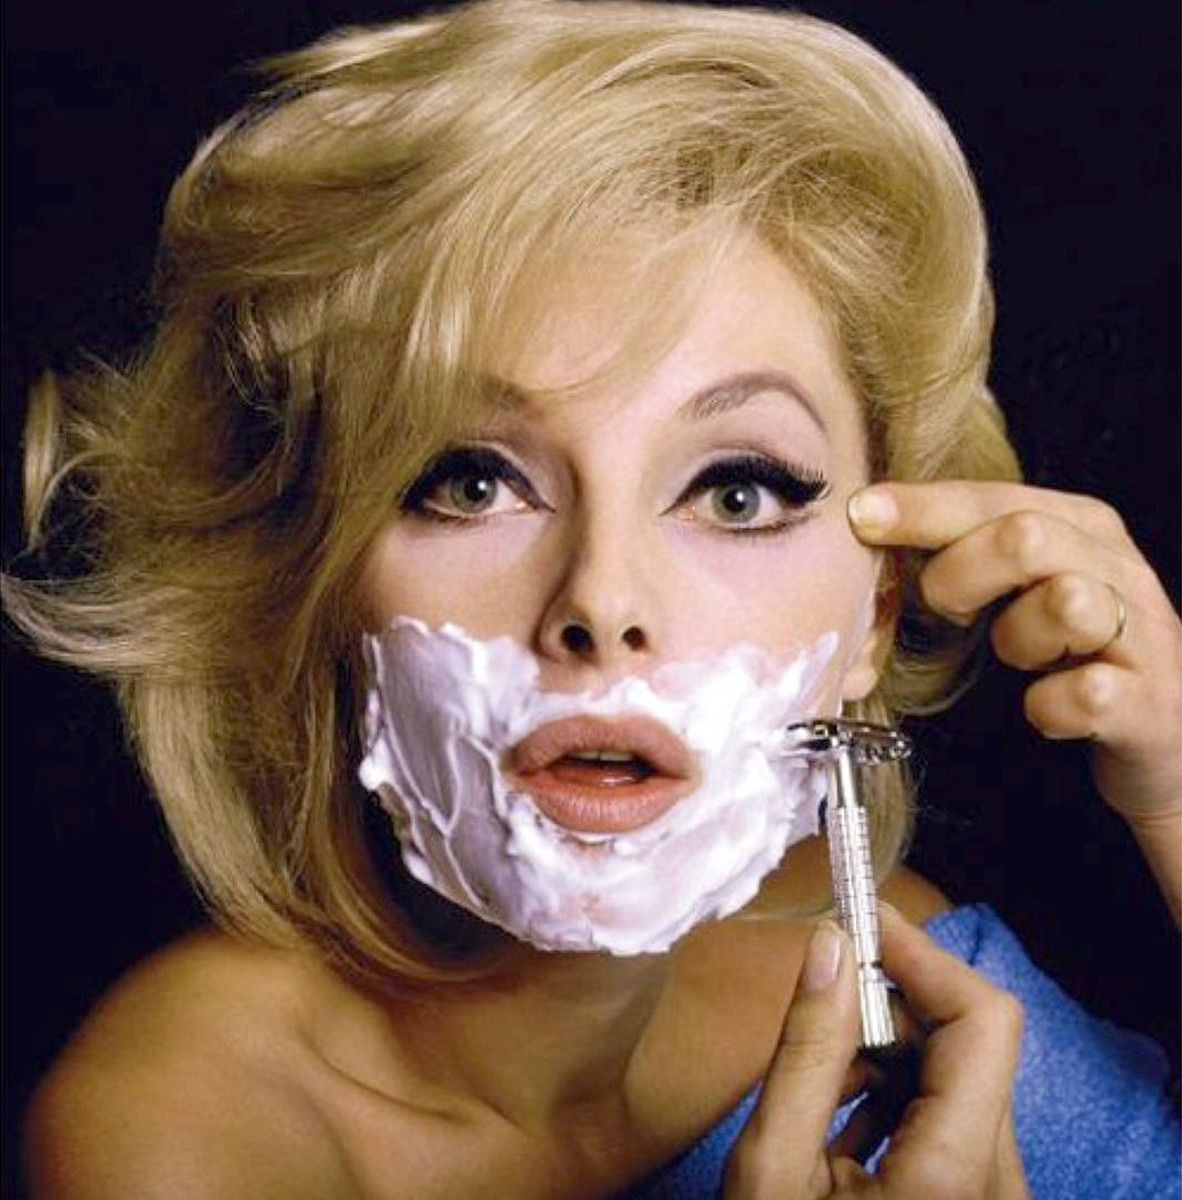 HEY, DO YOU SHAVE YOUR FACE? - Beautygeeks